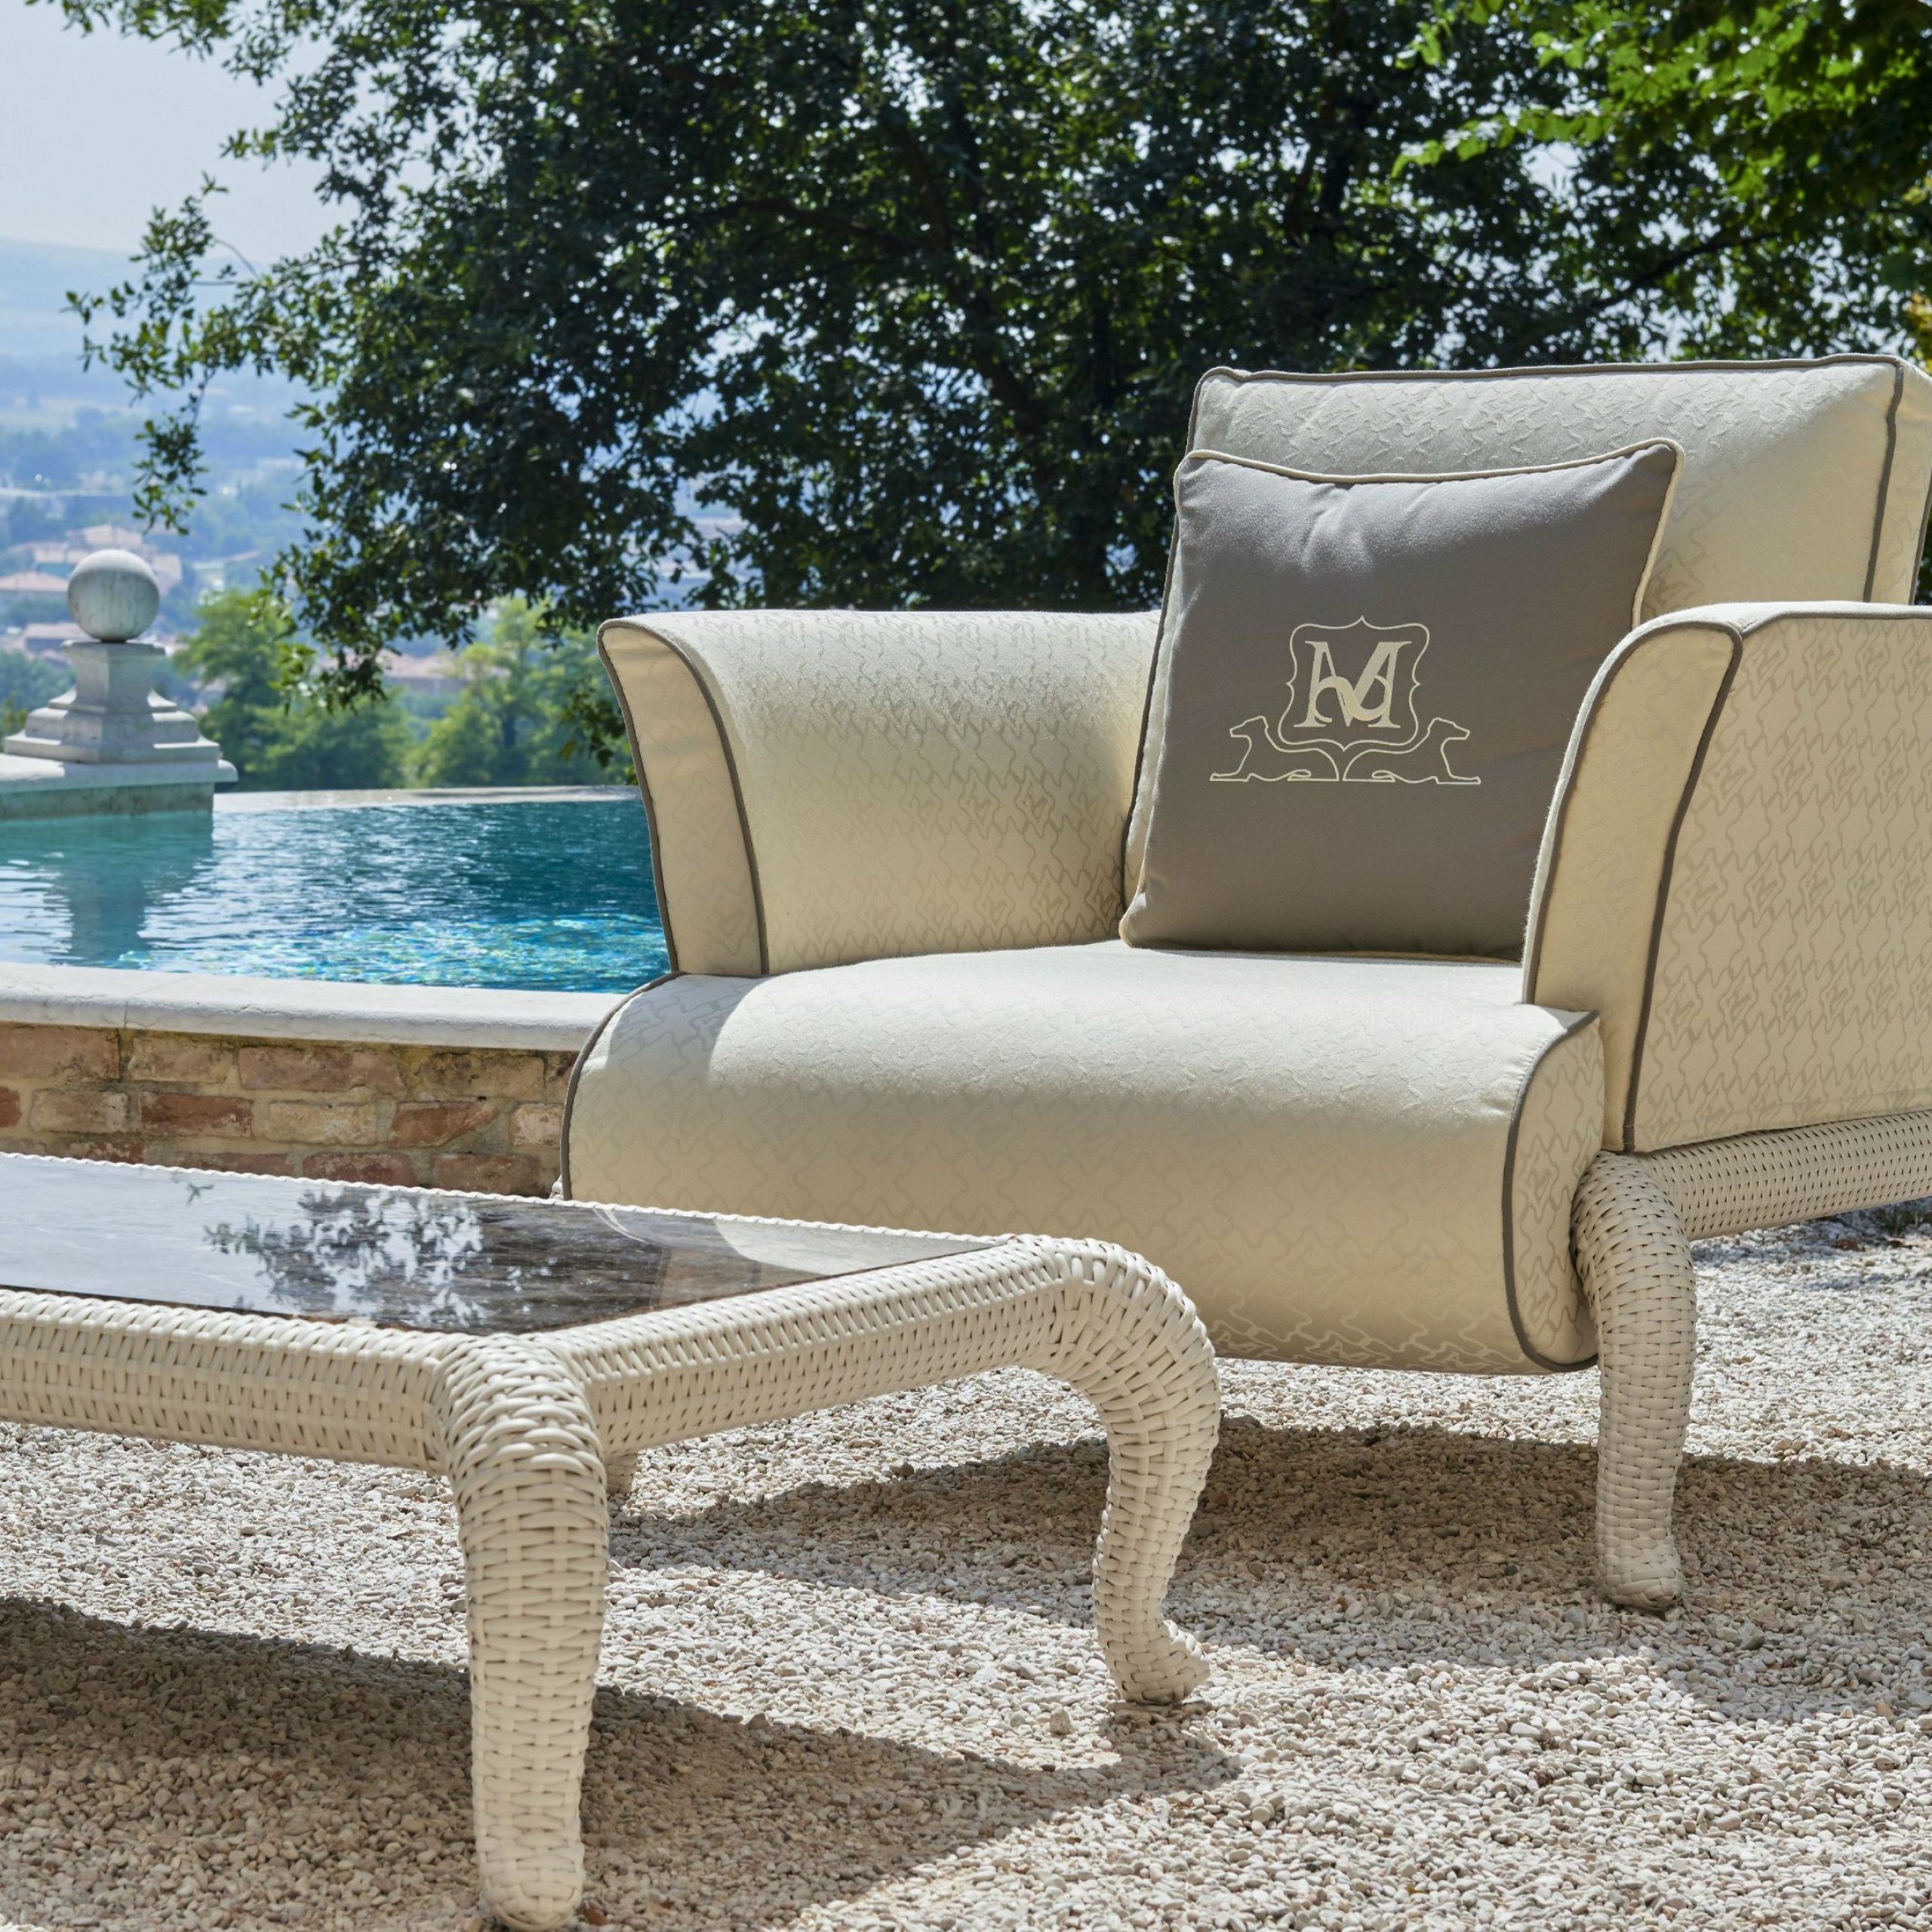 Outdoor Armchairs Throughout Latest Canopo Garden Armchairsamuele Mazza Outdoor Collectiondfn (View 6 of 15)